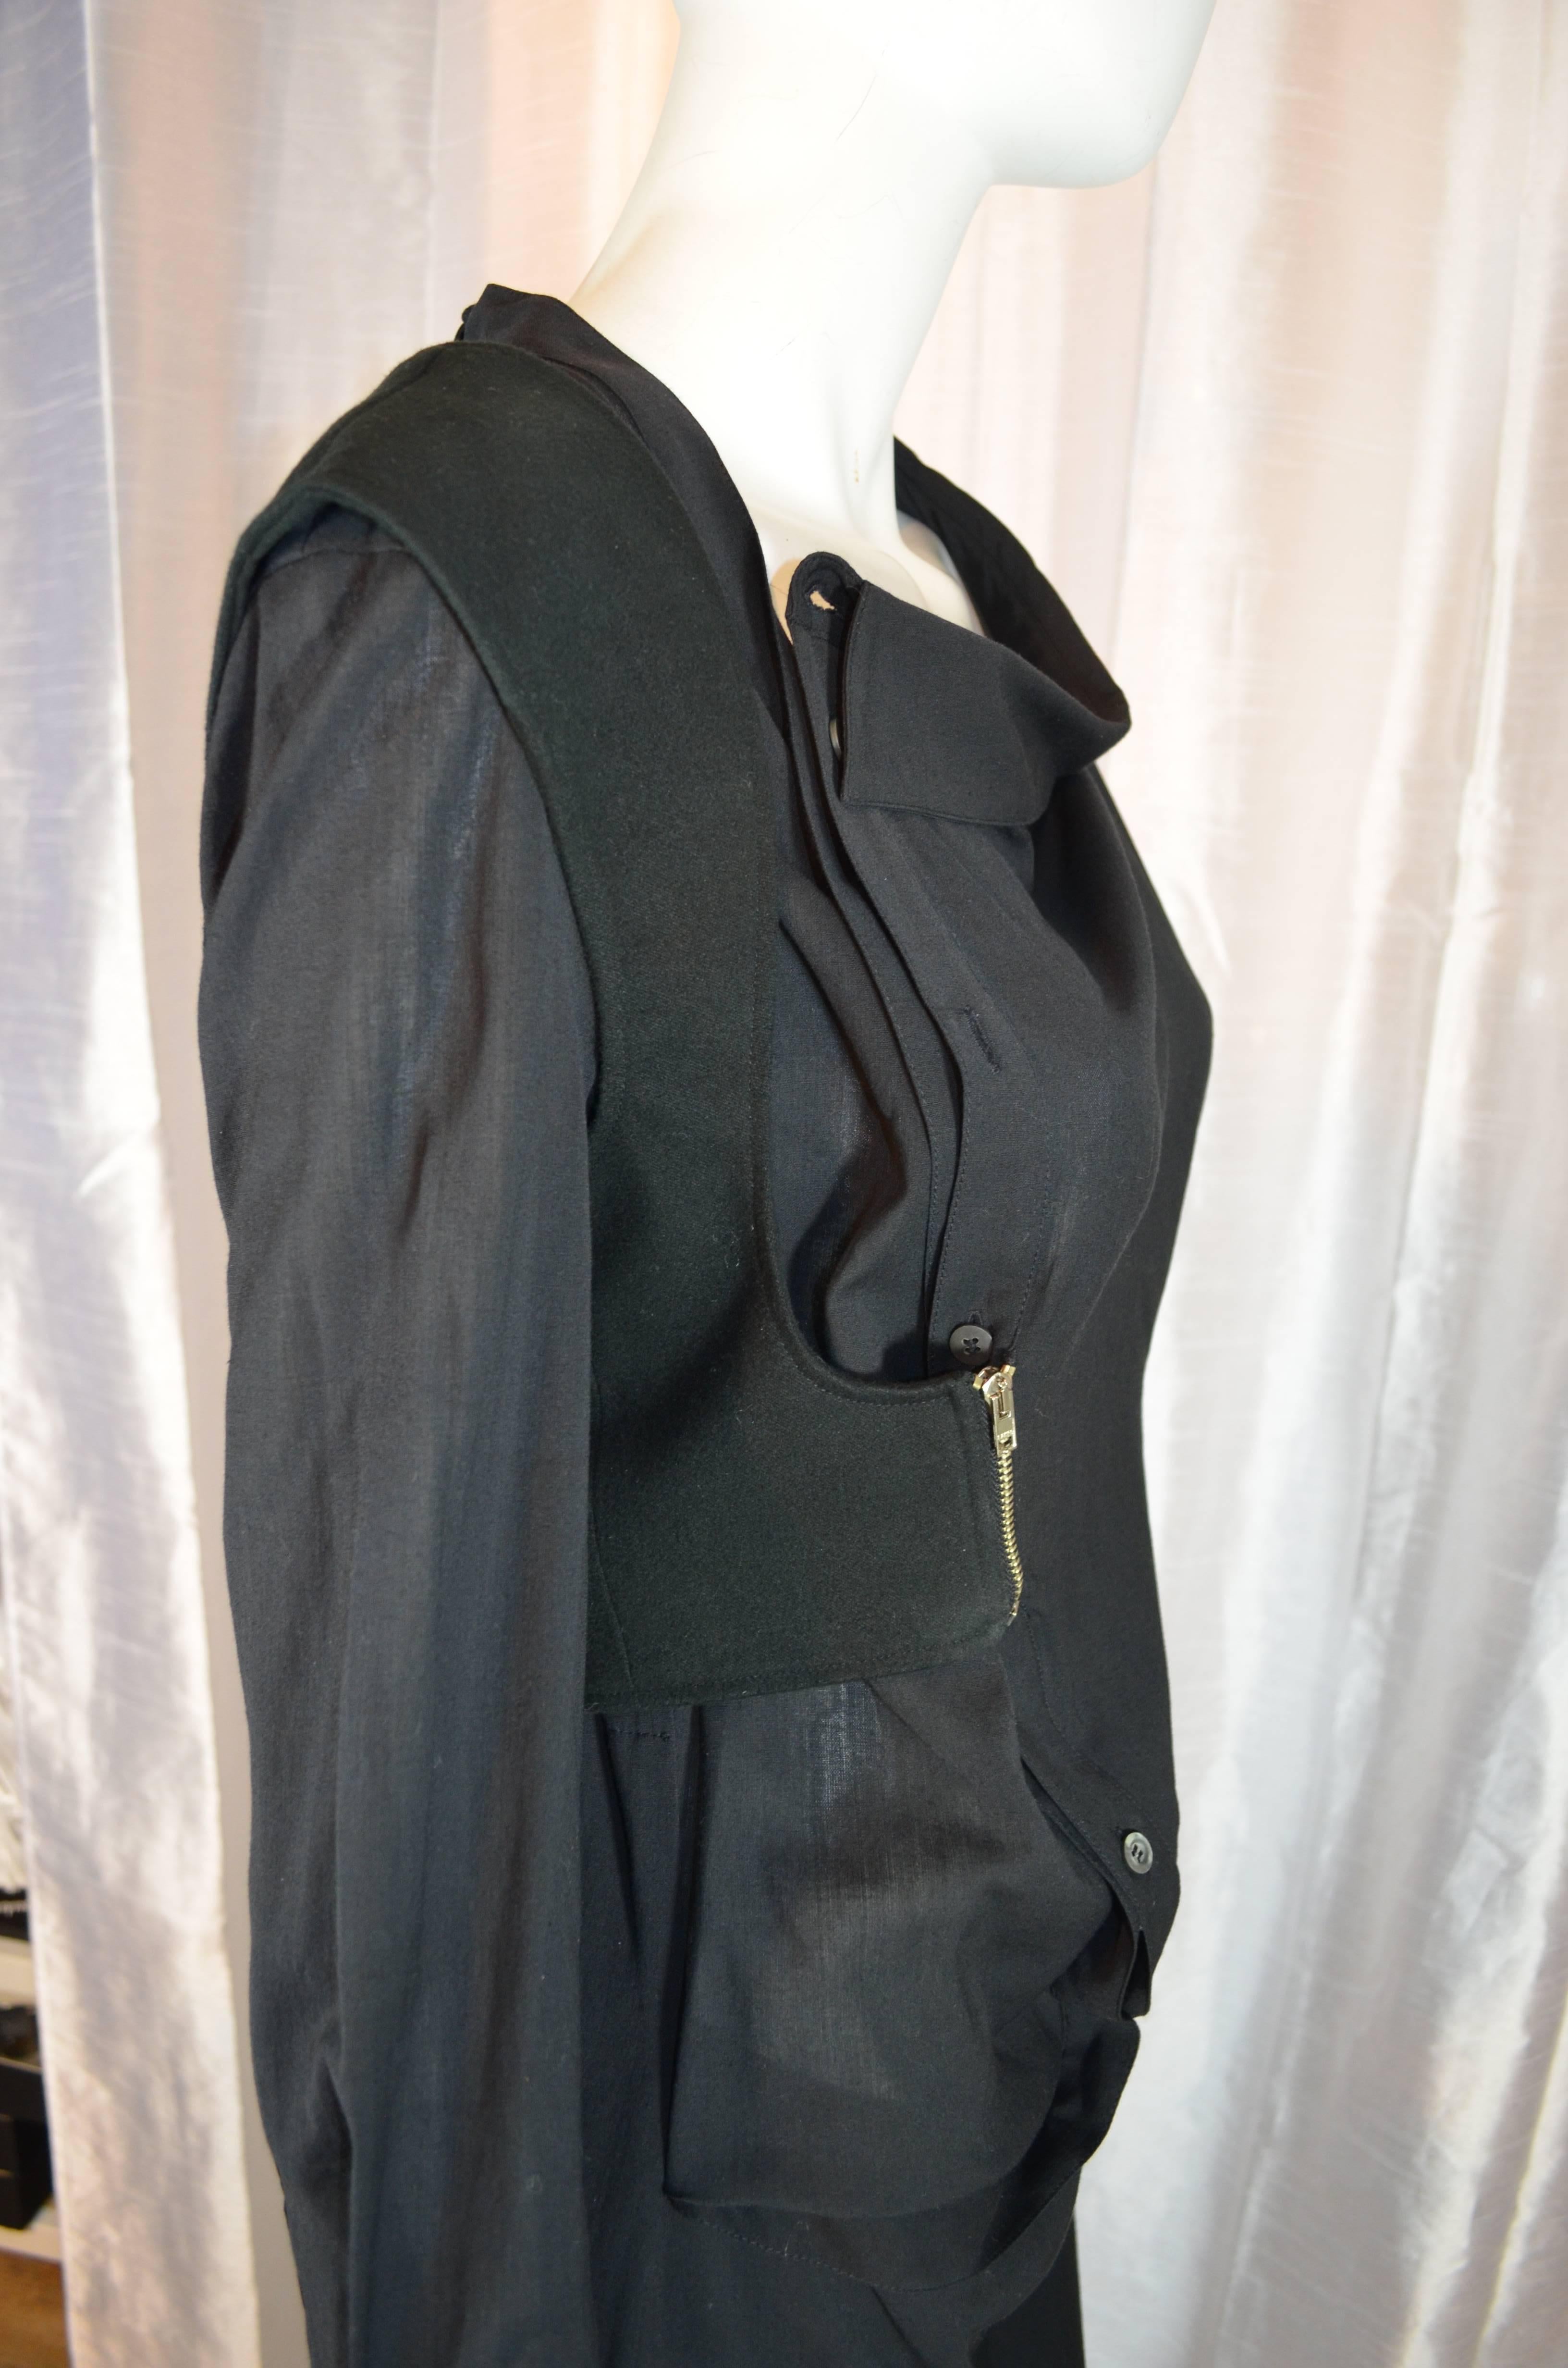 Hussein Chalayan Black Dress with Zippered Vest 2